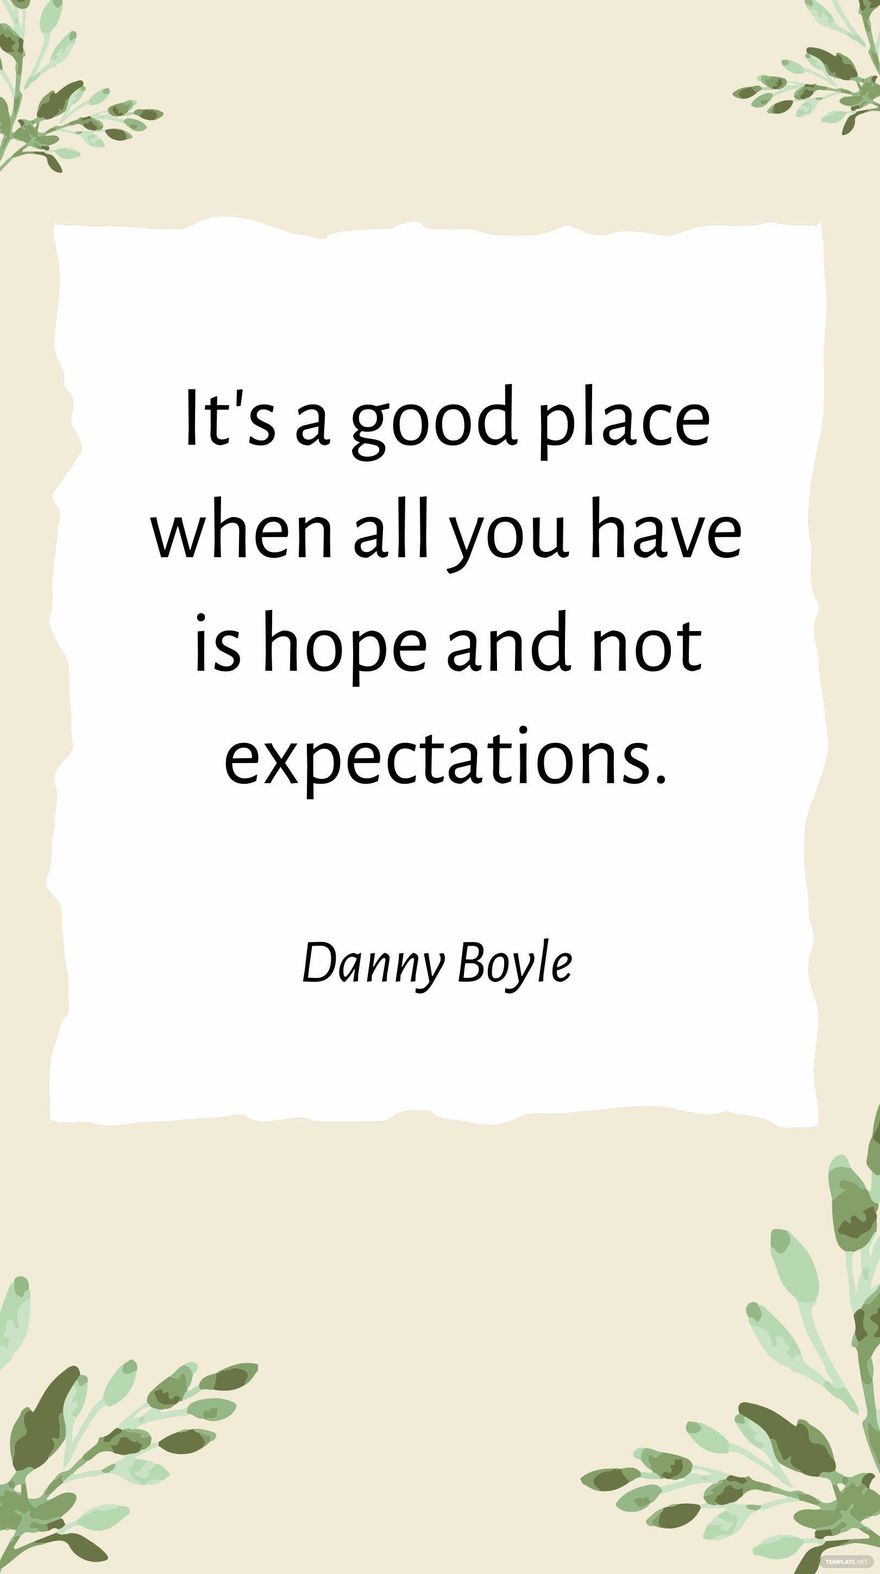 Danny Boyle - It's a good place when all you have is hope and not expectations.